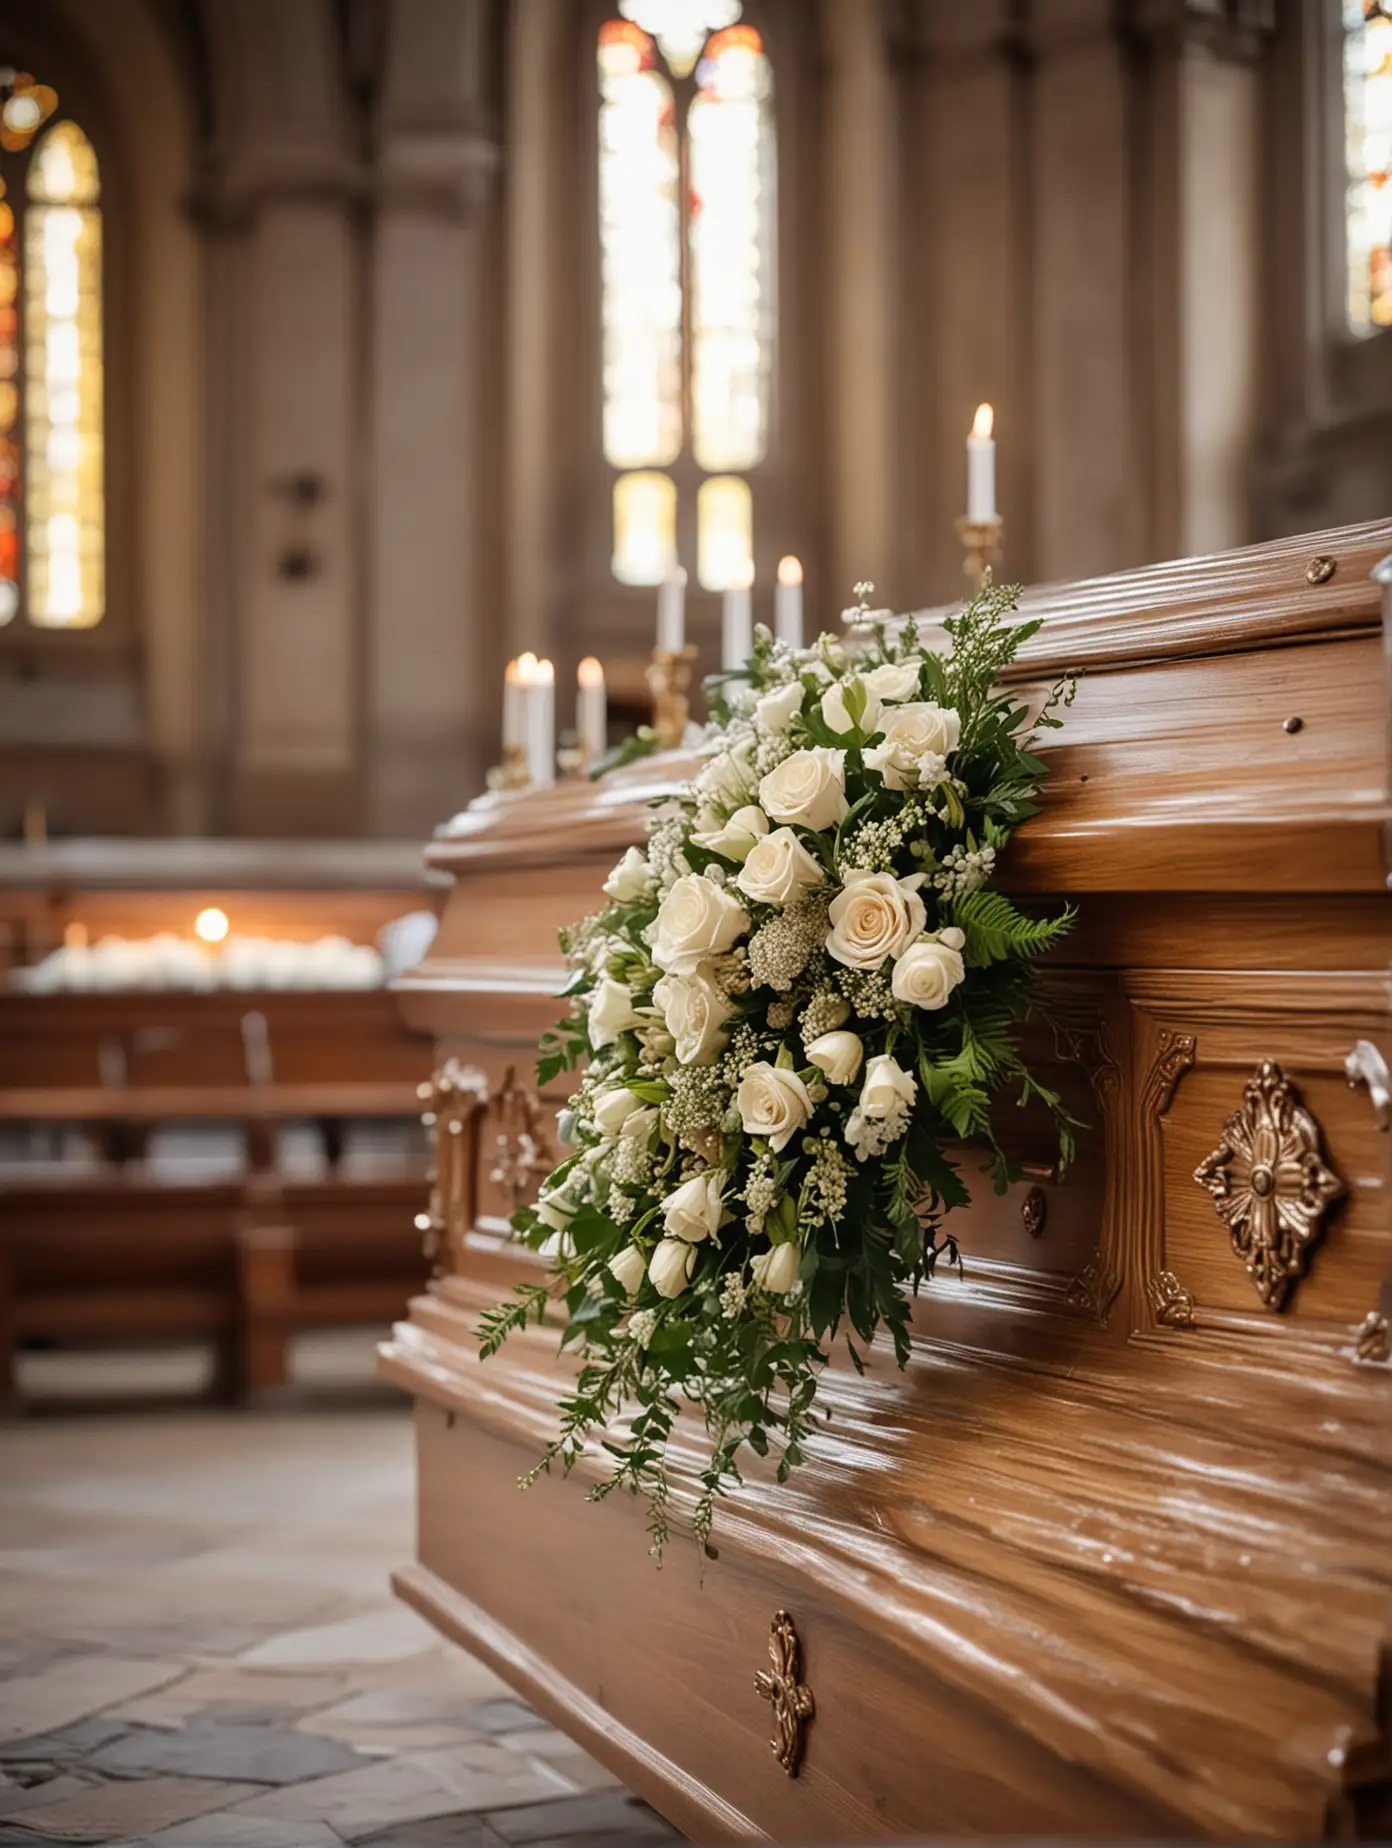 single light source, fragment of casket standing in church, casket seen in perspective, modest funeral bouquet lying on coffin lid, blurred background, bokeh